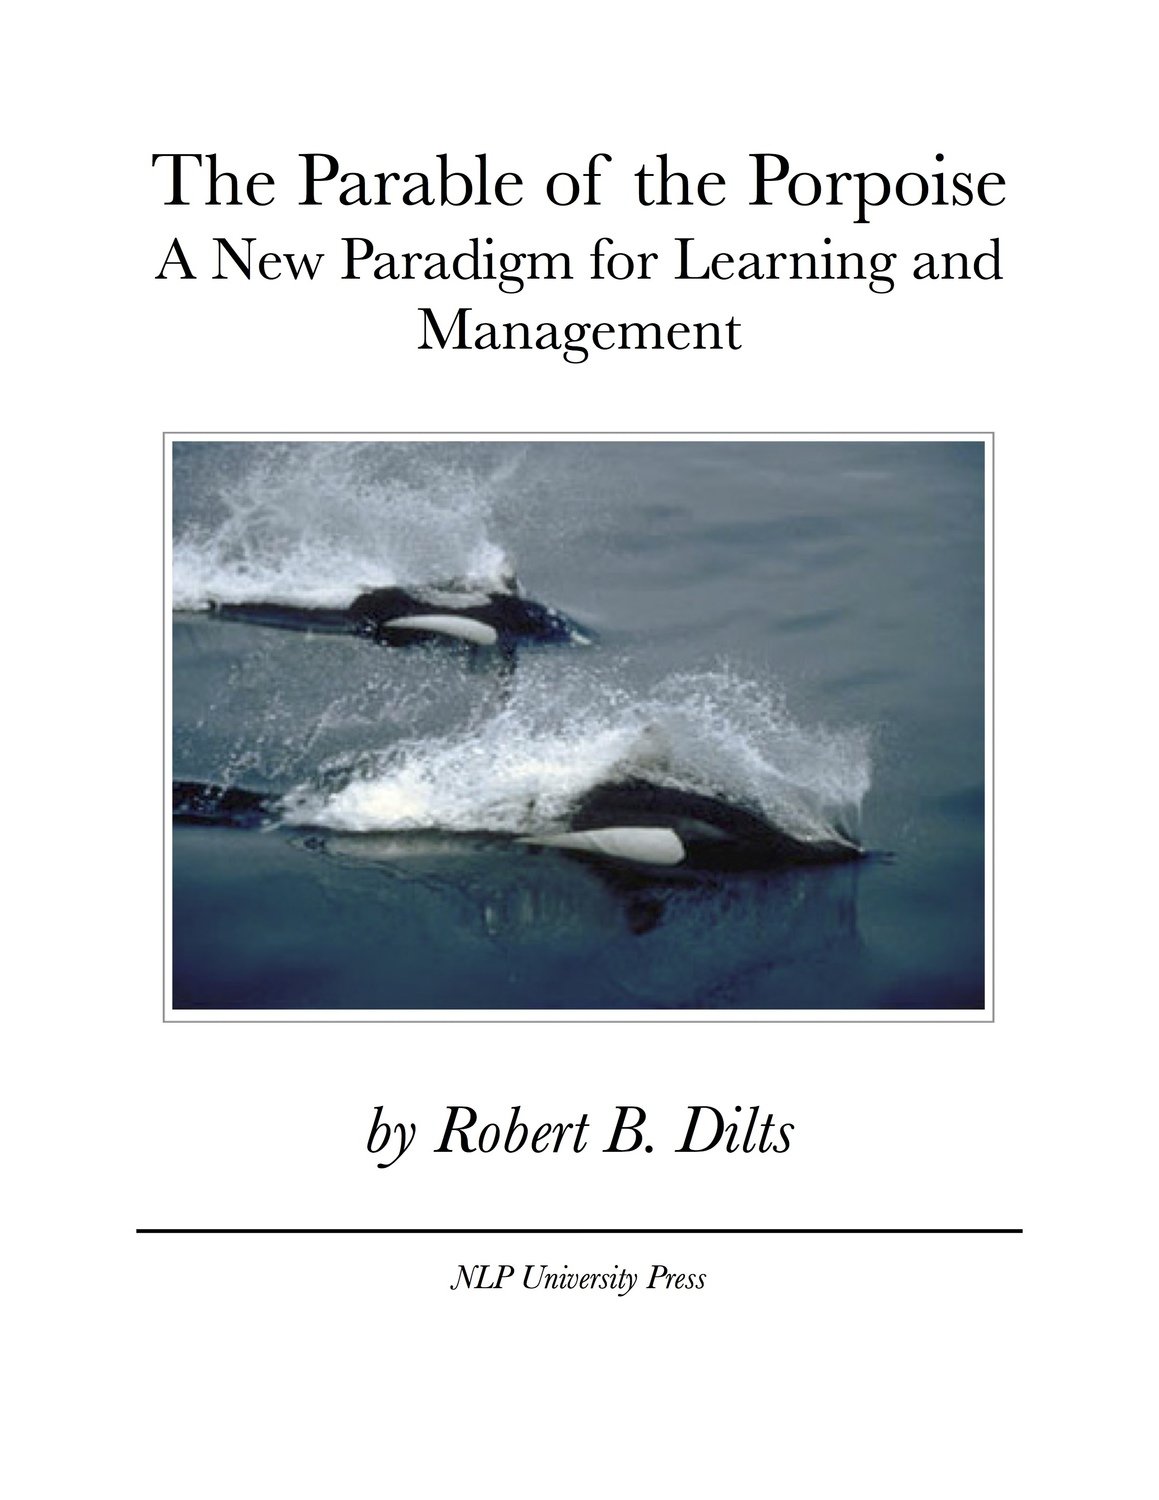 The Parable of the Porpoise [Booklet]